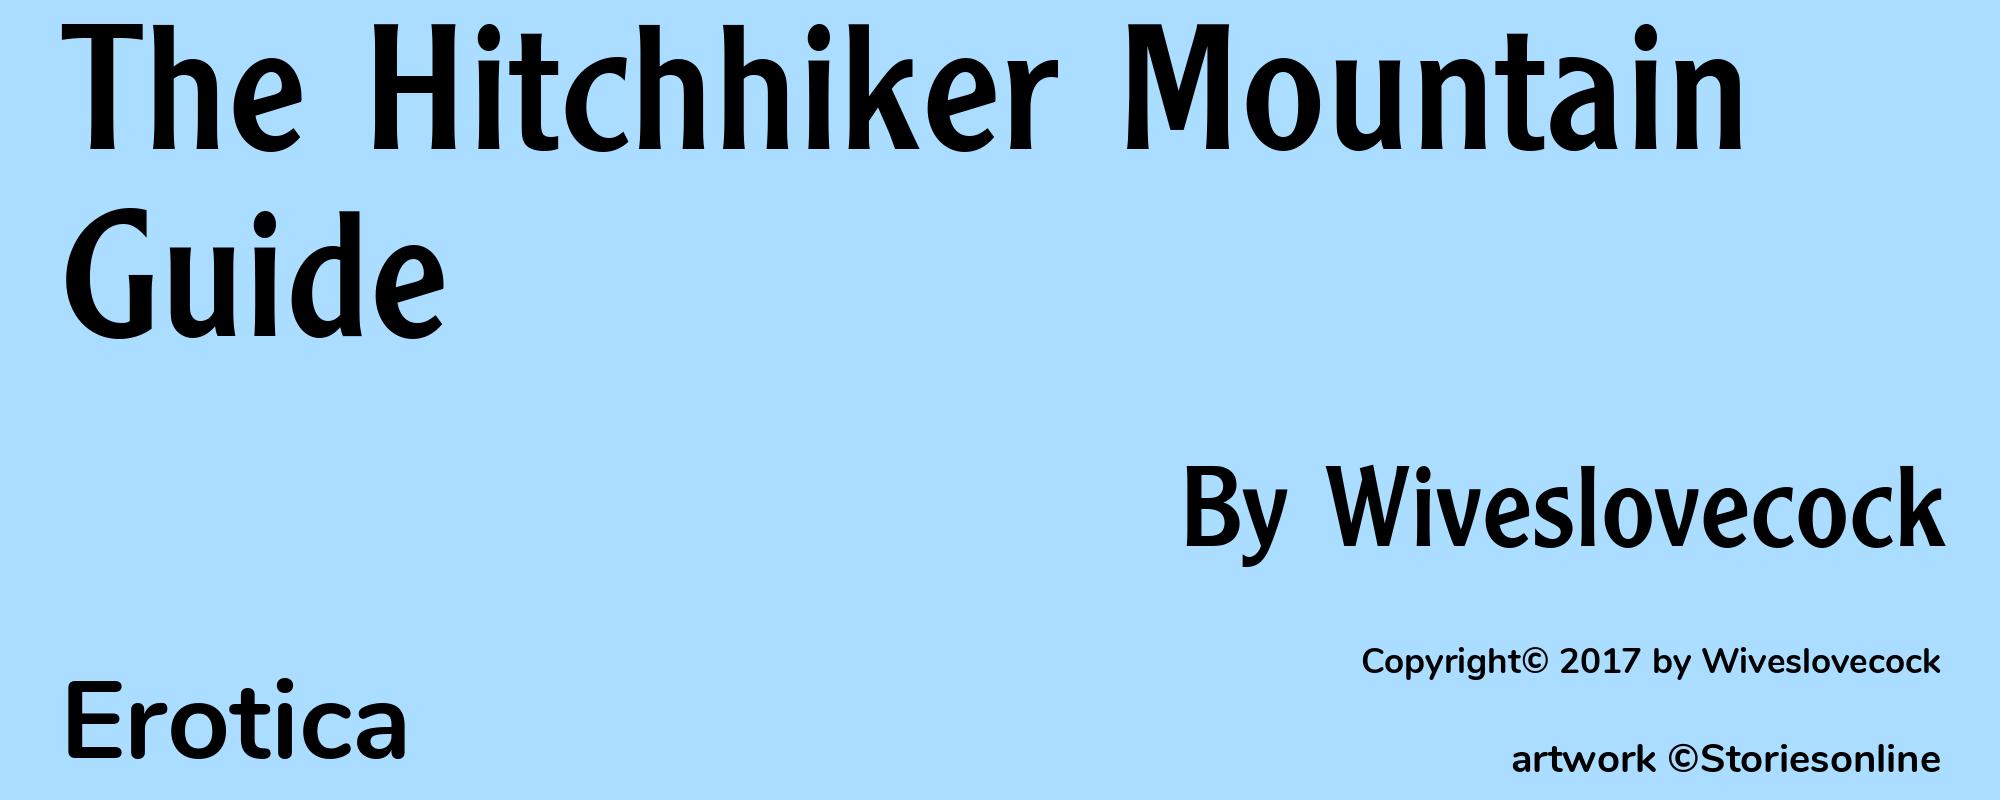 The Hitchhiker Mountain Guide - Cover